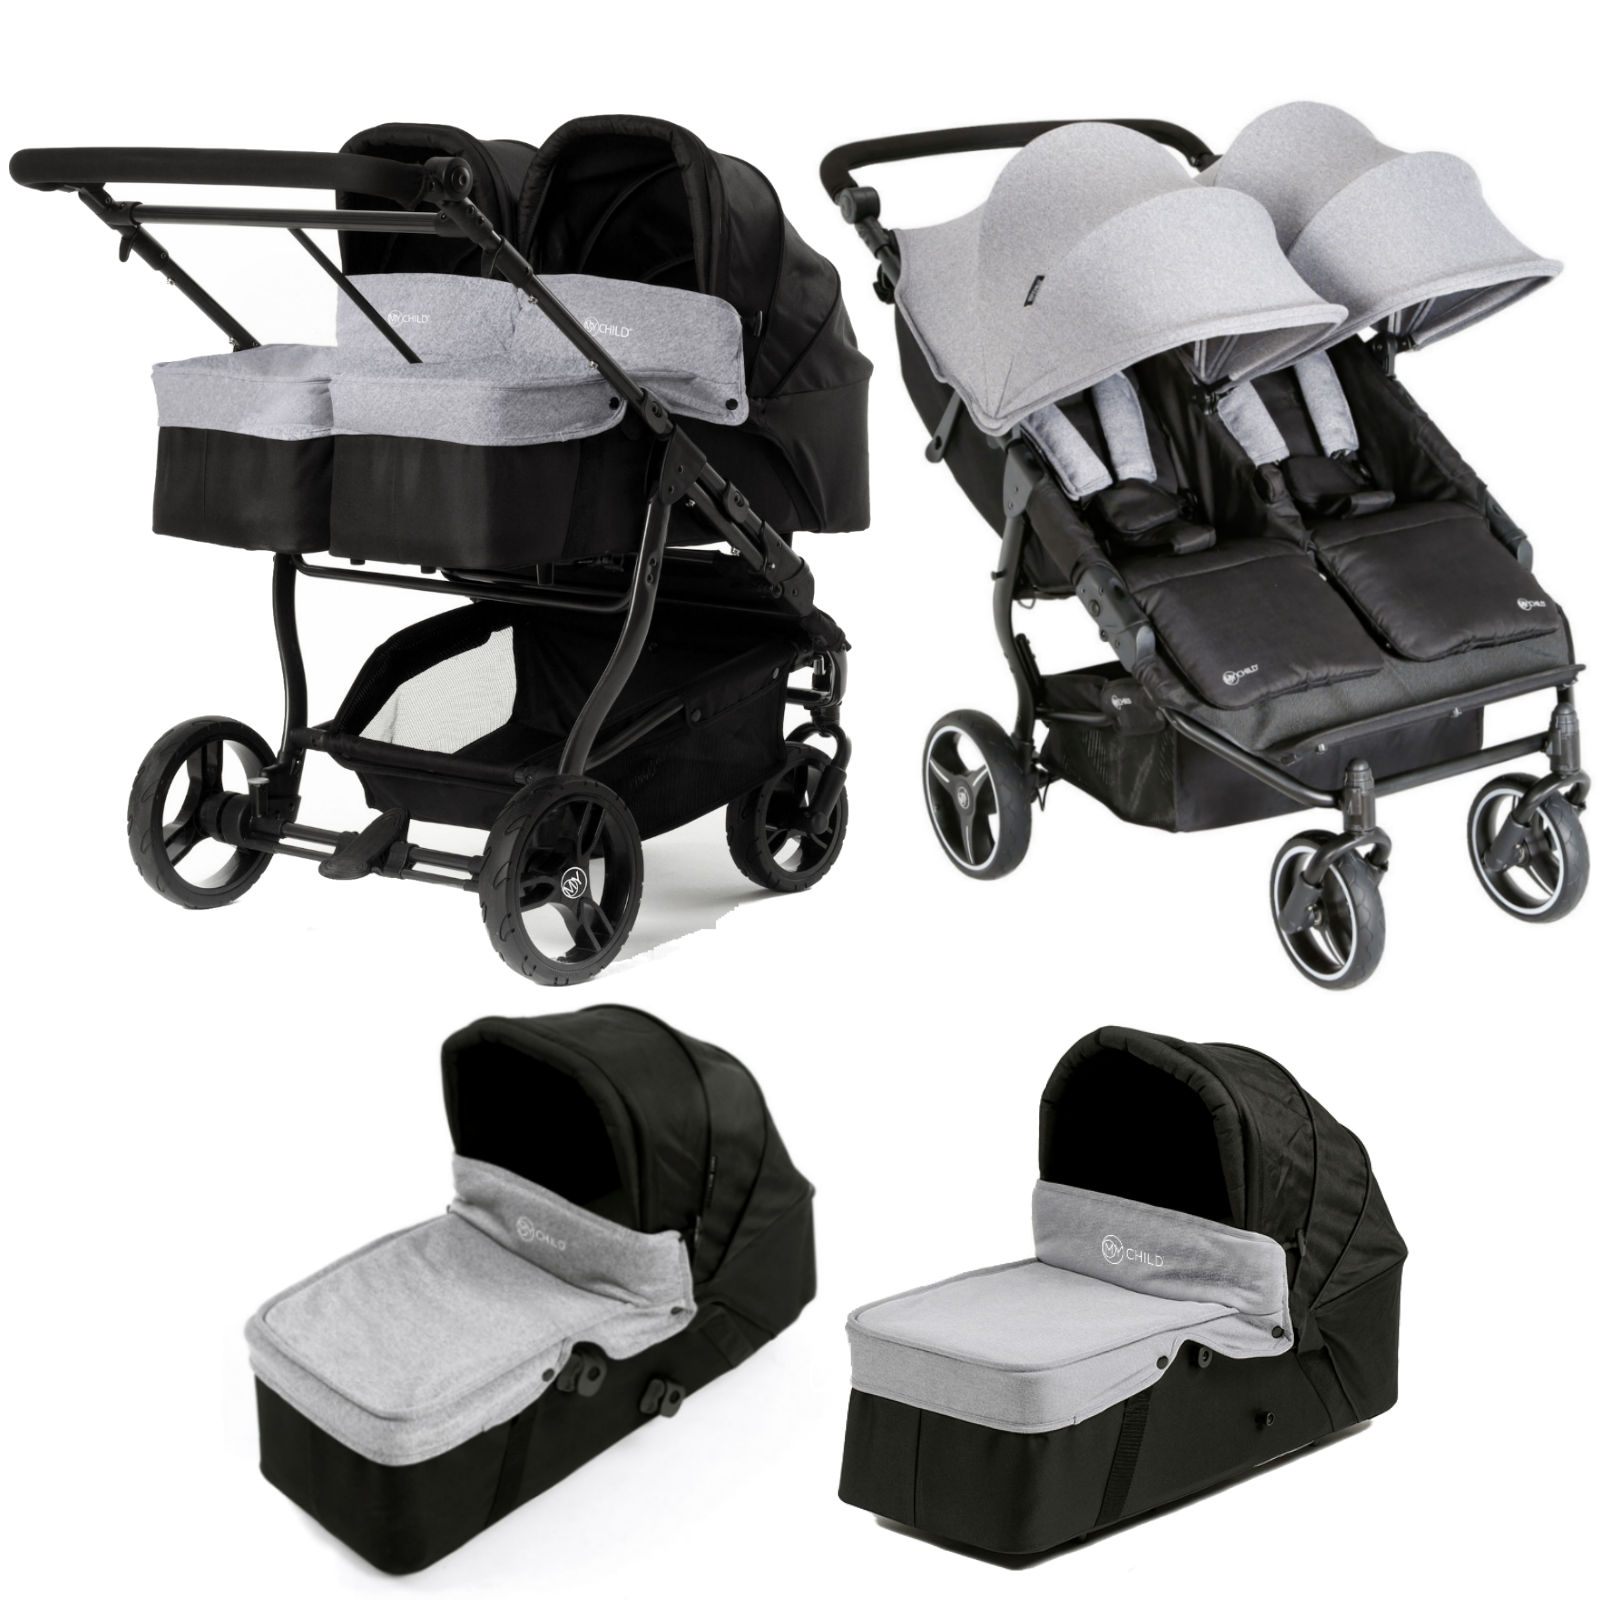 baby pushchair double